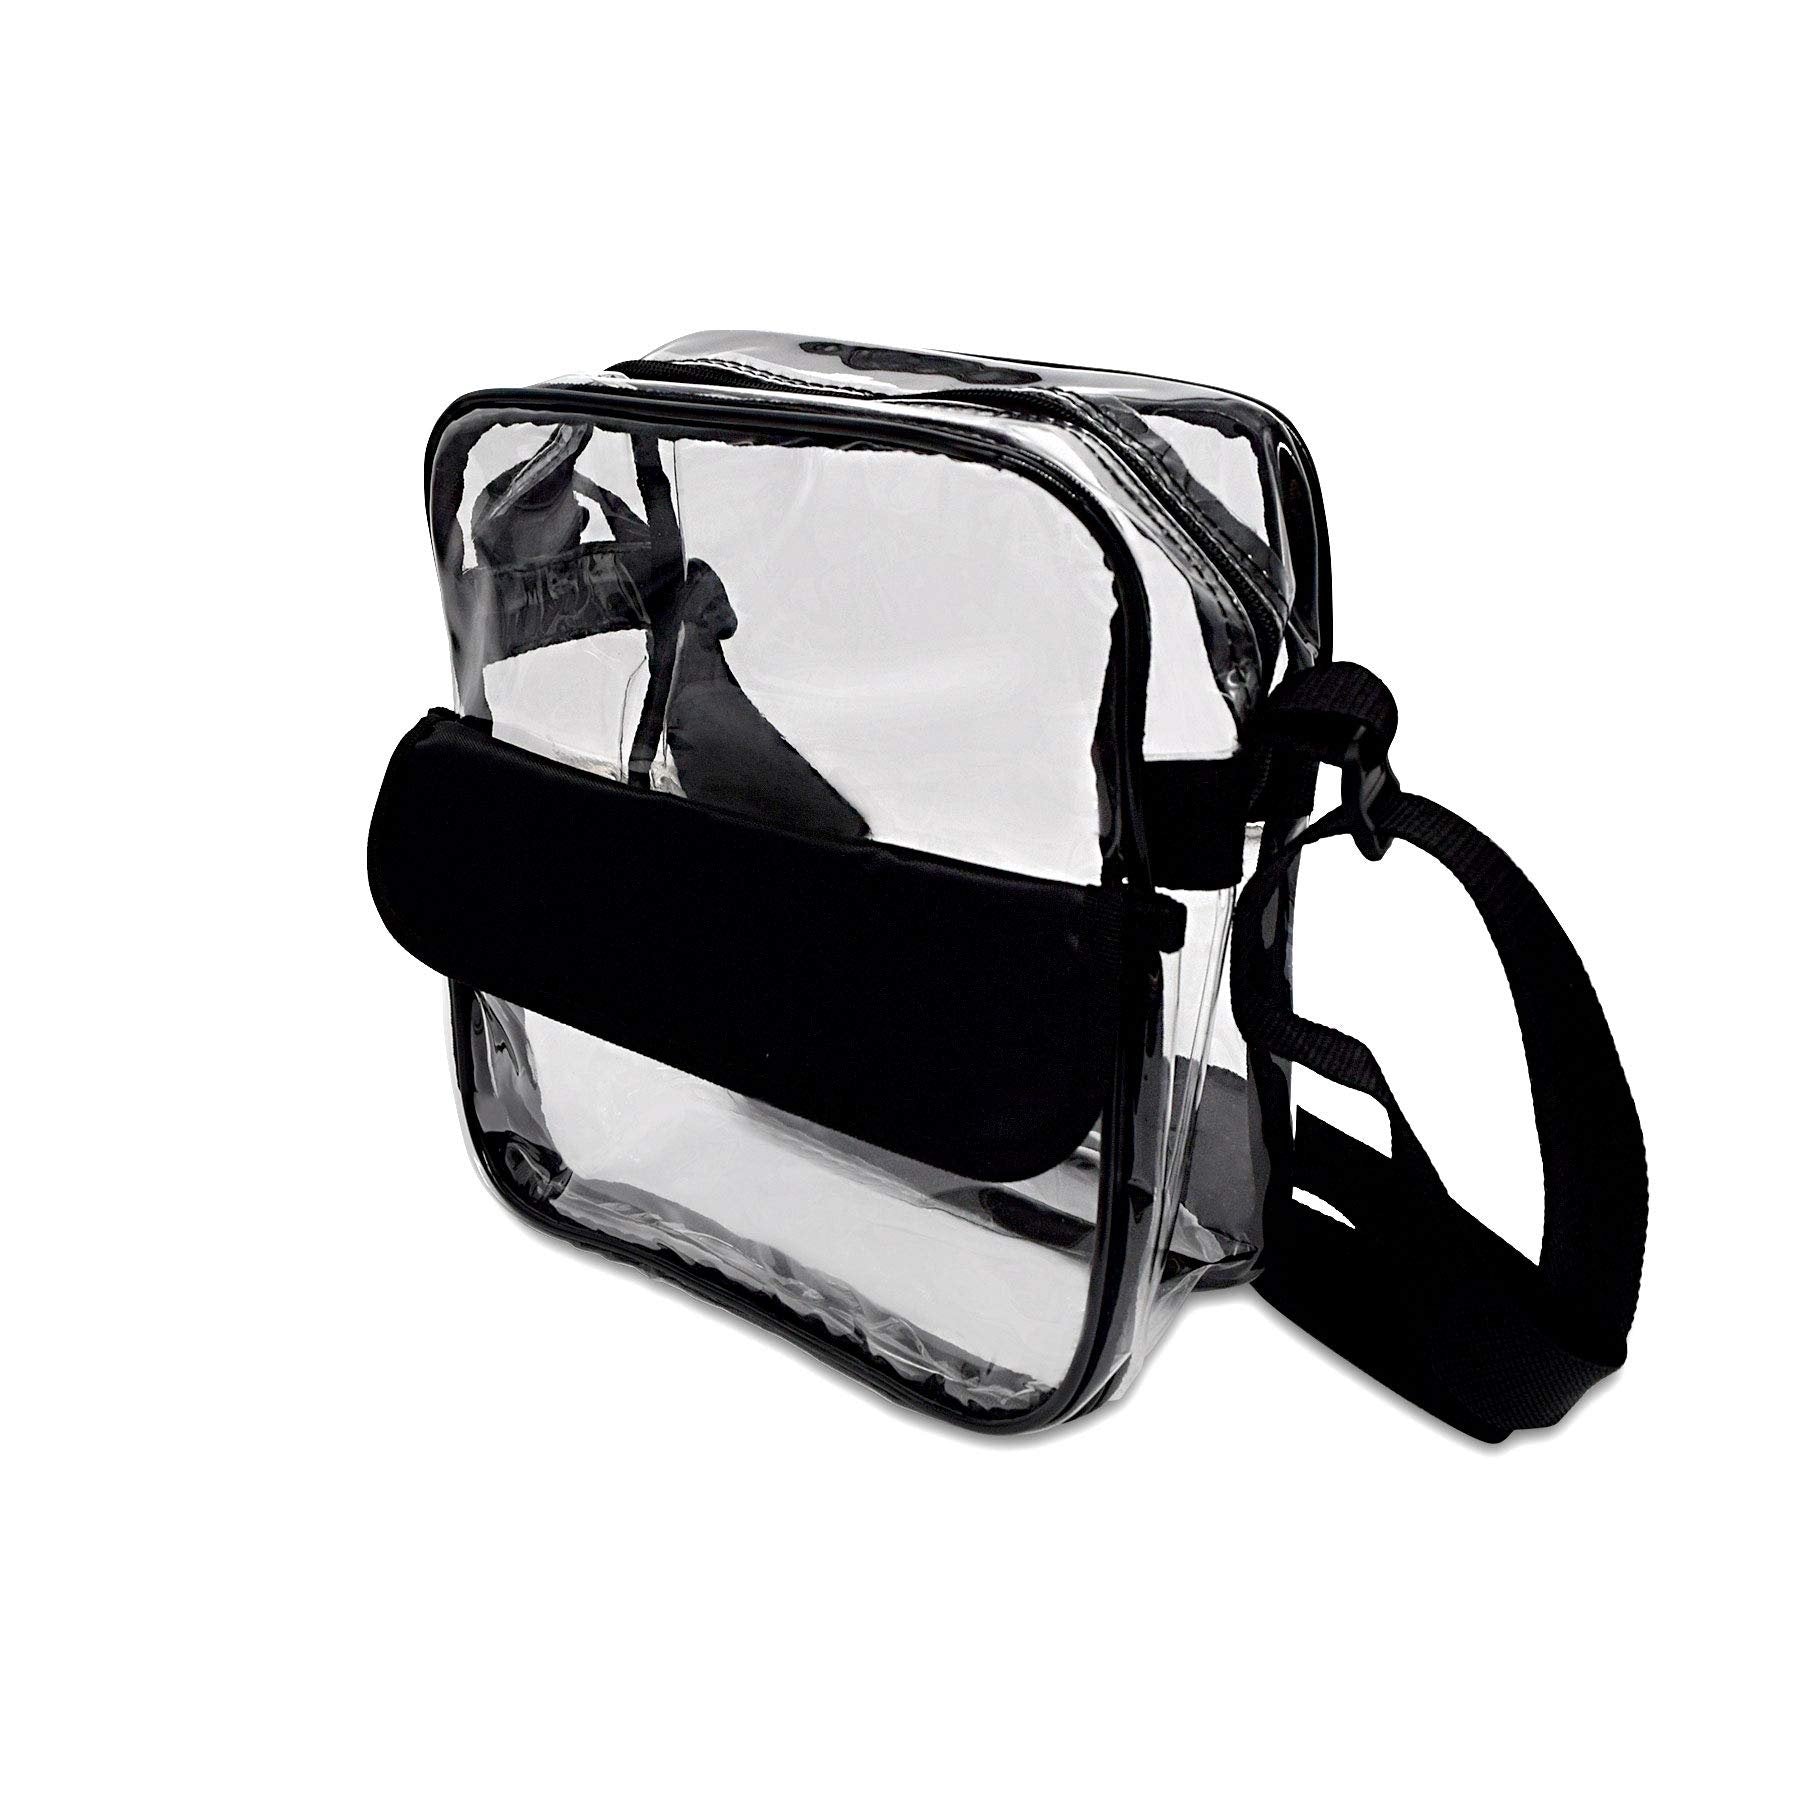 Black Clear Stadium Approved Crossbody Purse, Adjustable Strap, Front Pocket, 10x10x4.5